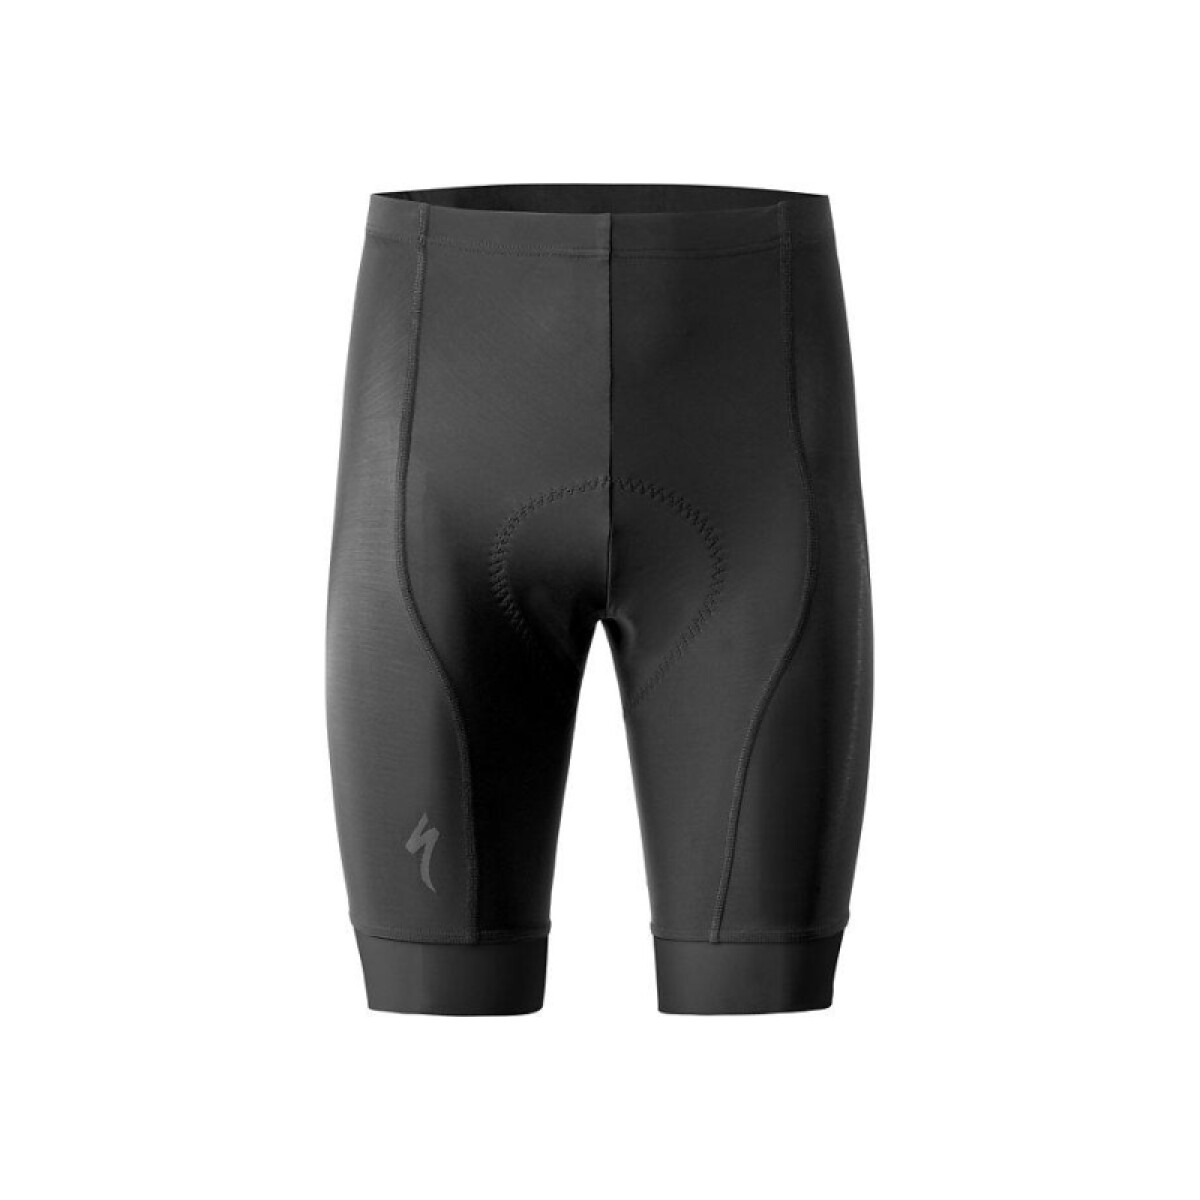 Calza Corta Specialized Rbx Short Blk - Talle M 